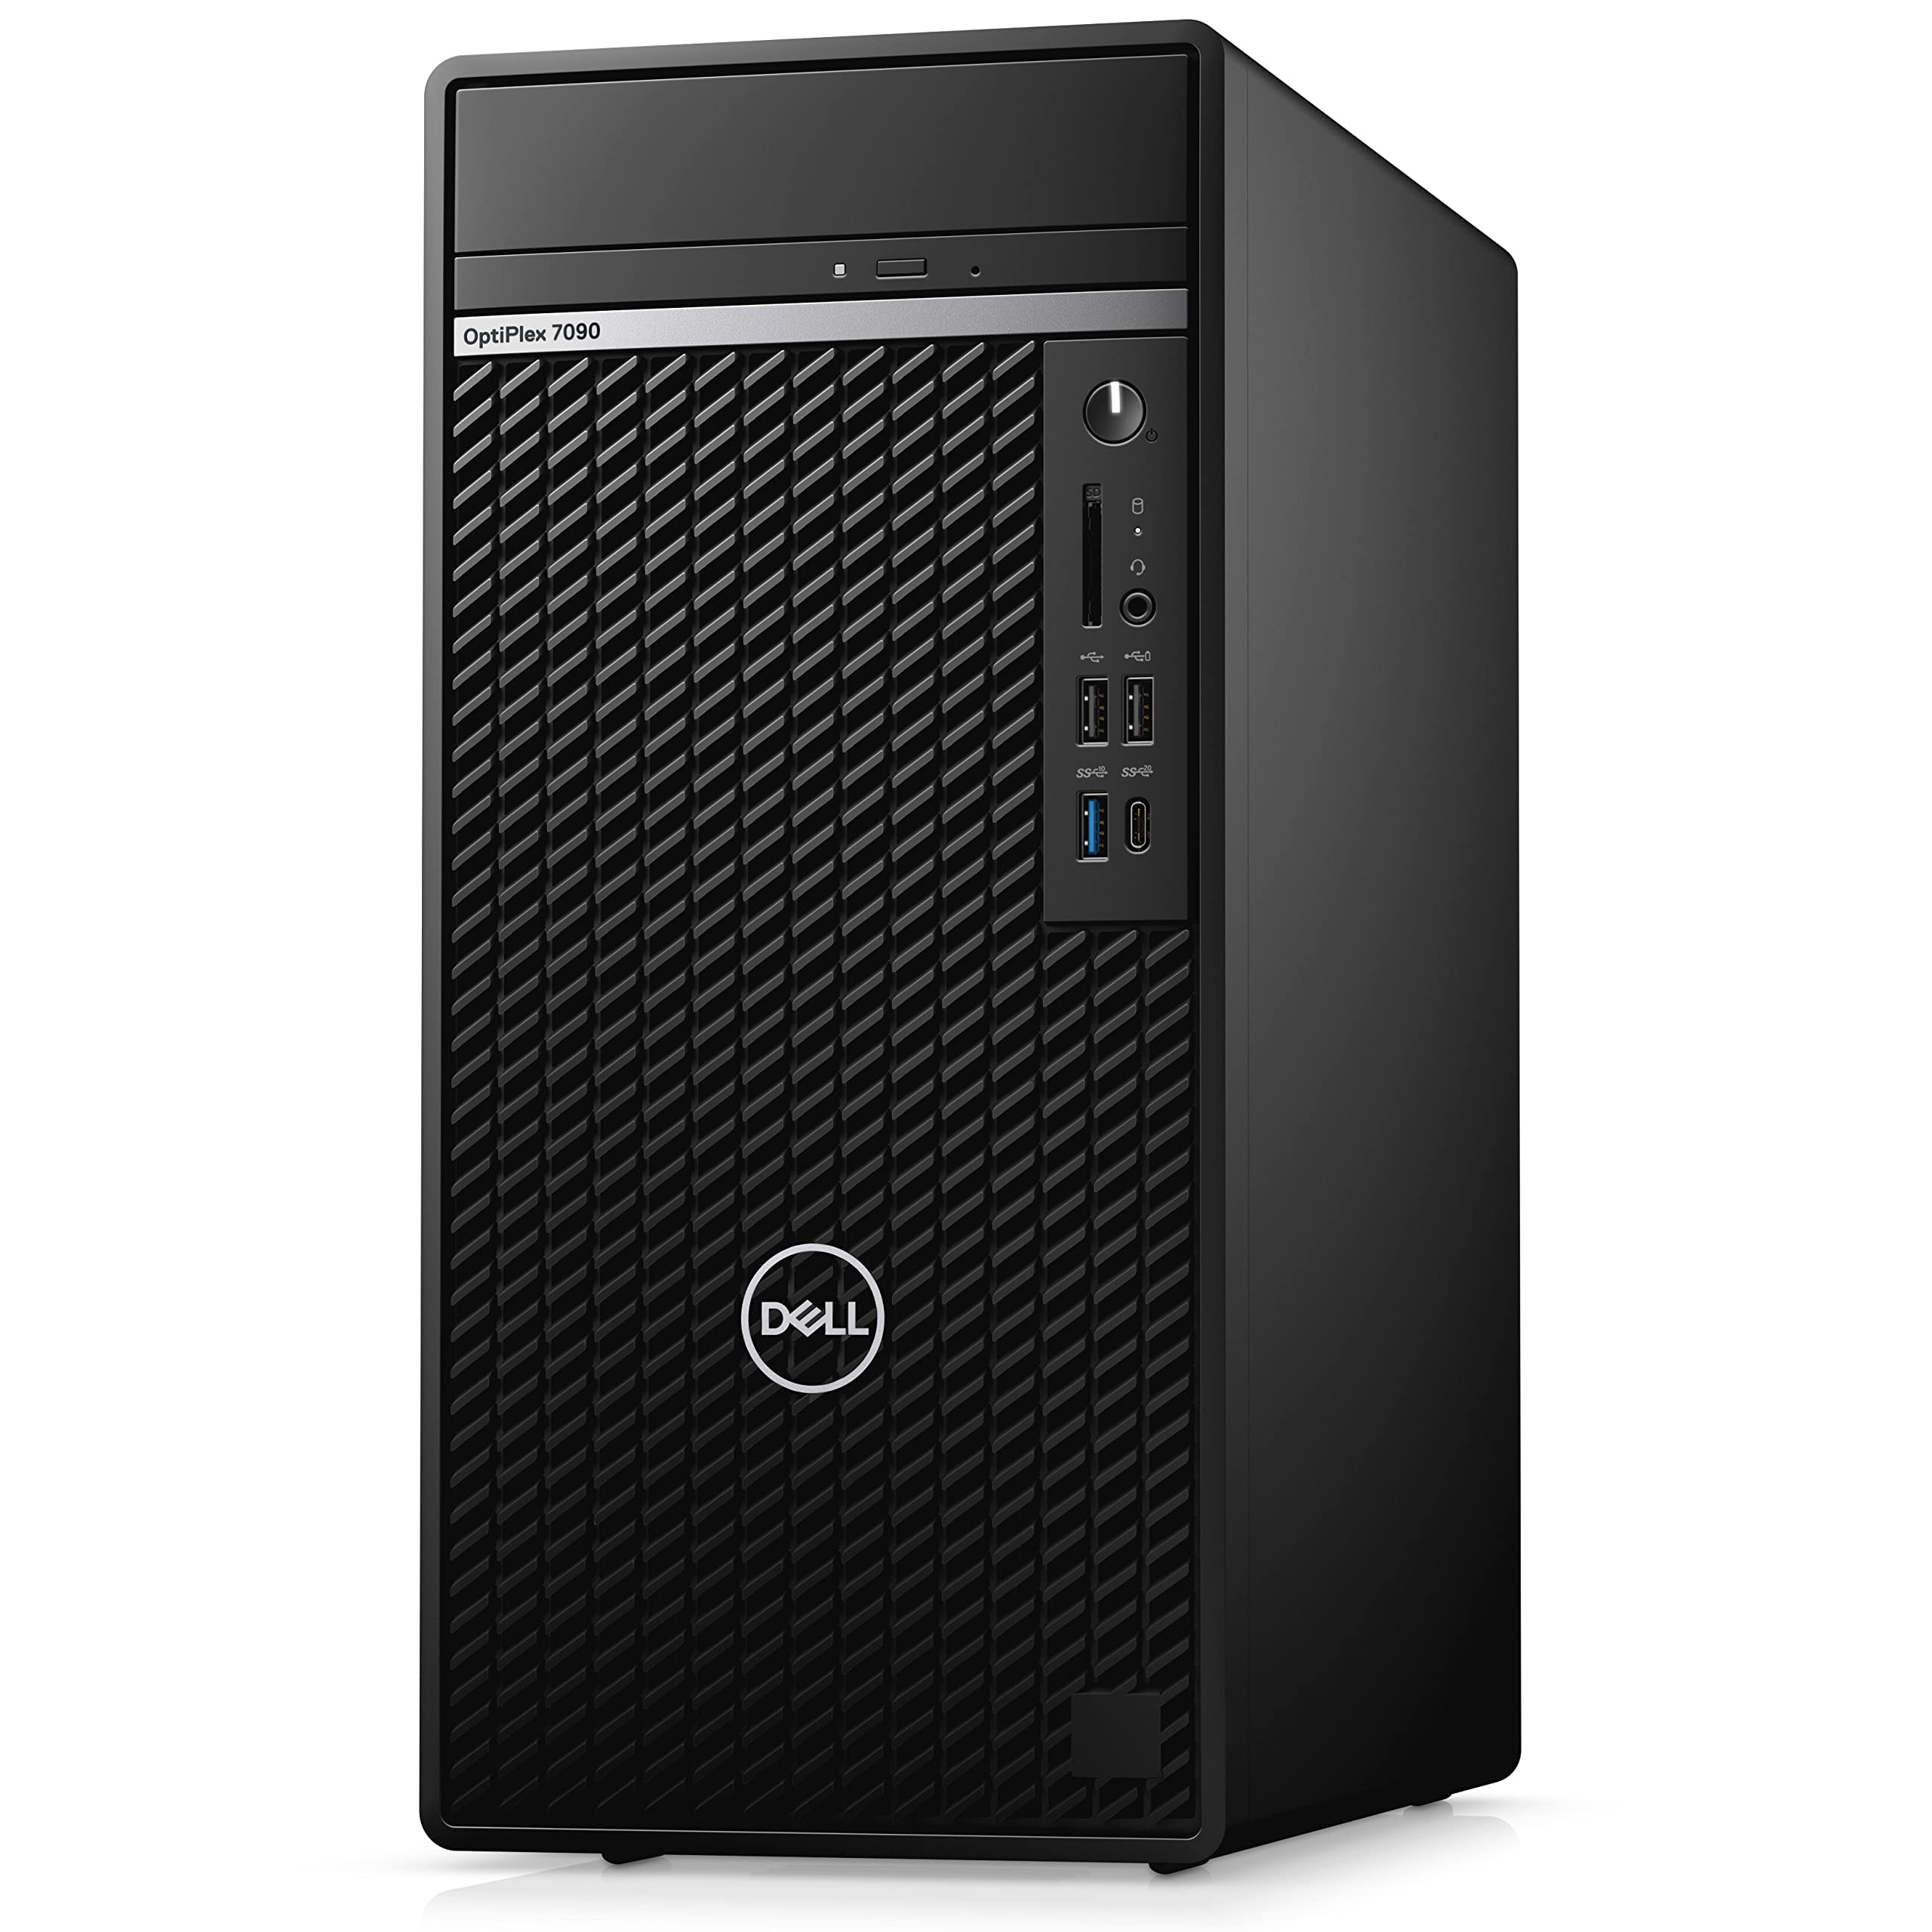 Dell 2022 Newest OptiPlex 7090 Business Tower Desktop, Intel Octa-Core i7-11700 Up to 4.9GHz, 16GB DDR4 RAM, 1TB PCIe SSD + 1TB HDD, DVDRW, WiFi Adapter, Ethernet, Type-C, Windows 11 Pro